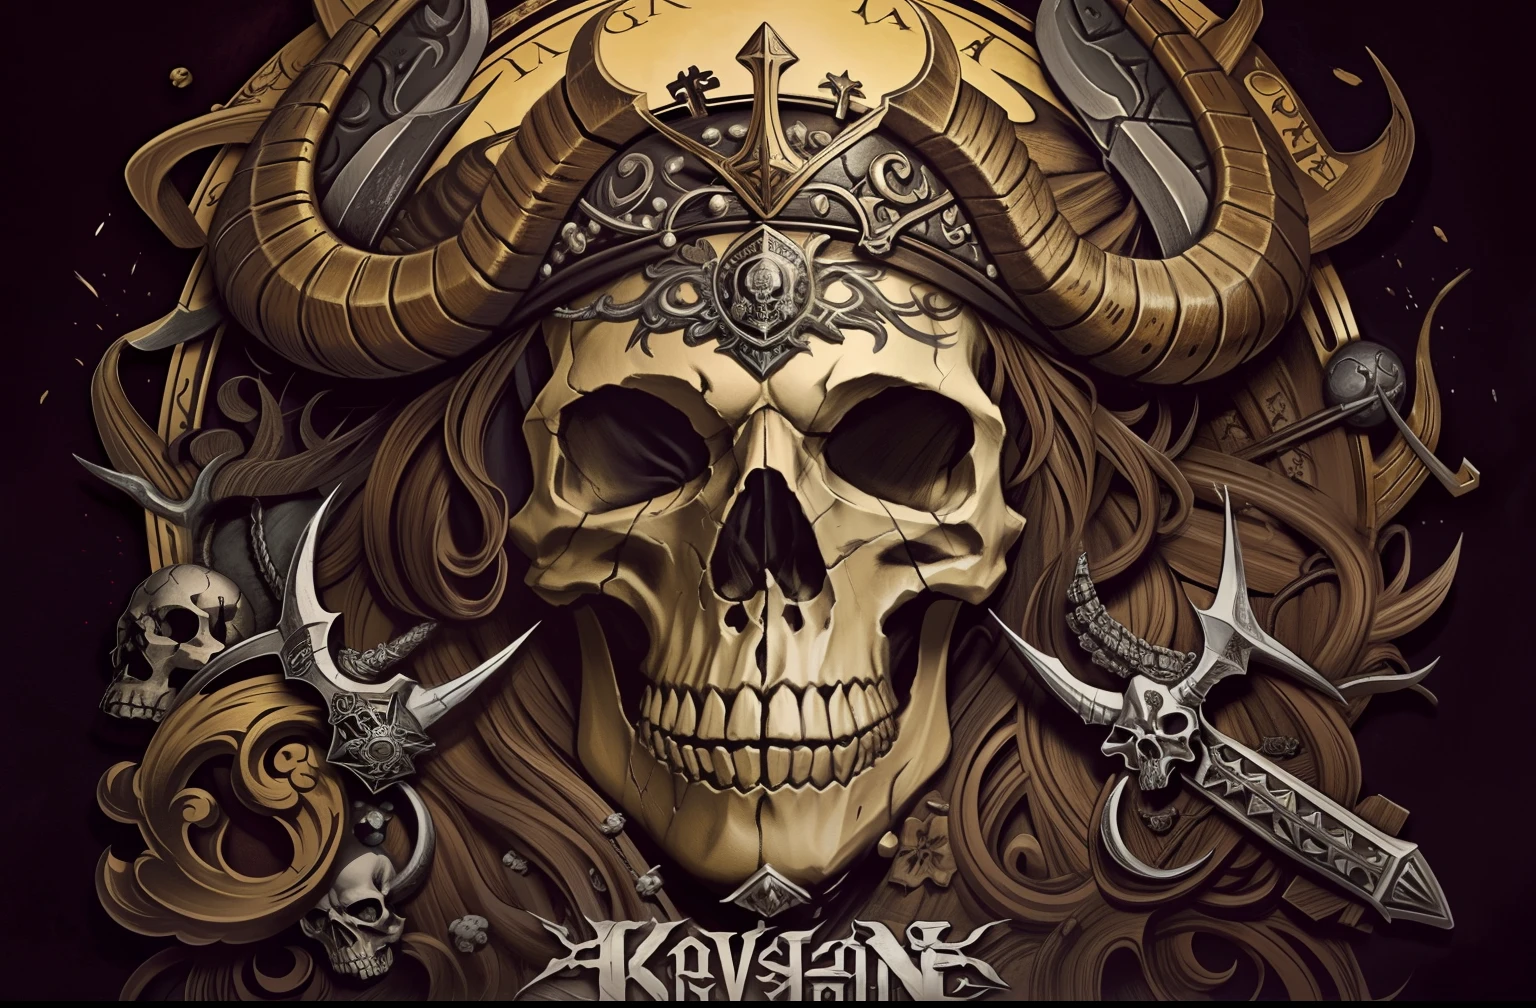 High resolution , extreme detail , 4k , HDR , a skull with horns and a crown on it's head, skull design for a rock band, dramatic artwork, brom digital art, el bosco and dan mumford, adorned with demon skulls, brom art, detailed cover artwork, official poster artwork, bone armor, metal album cover art, braavos, dnd cover art, ram skulls, detailed artwork, board game cover art